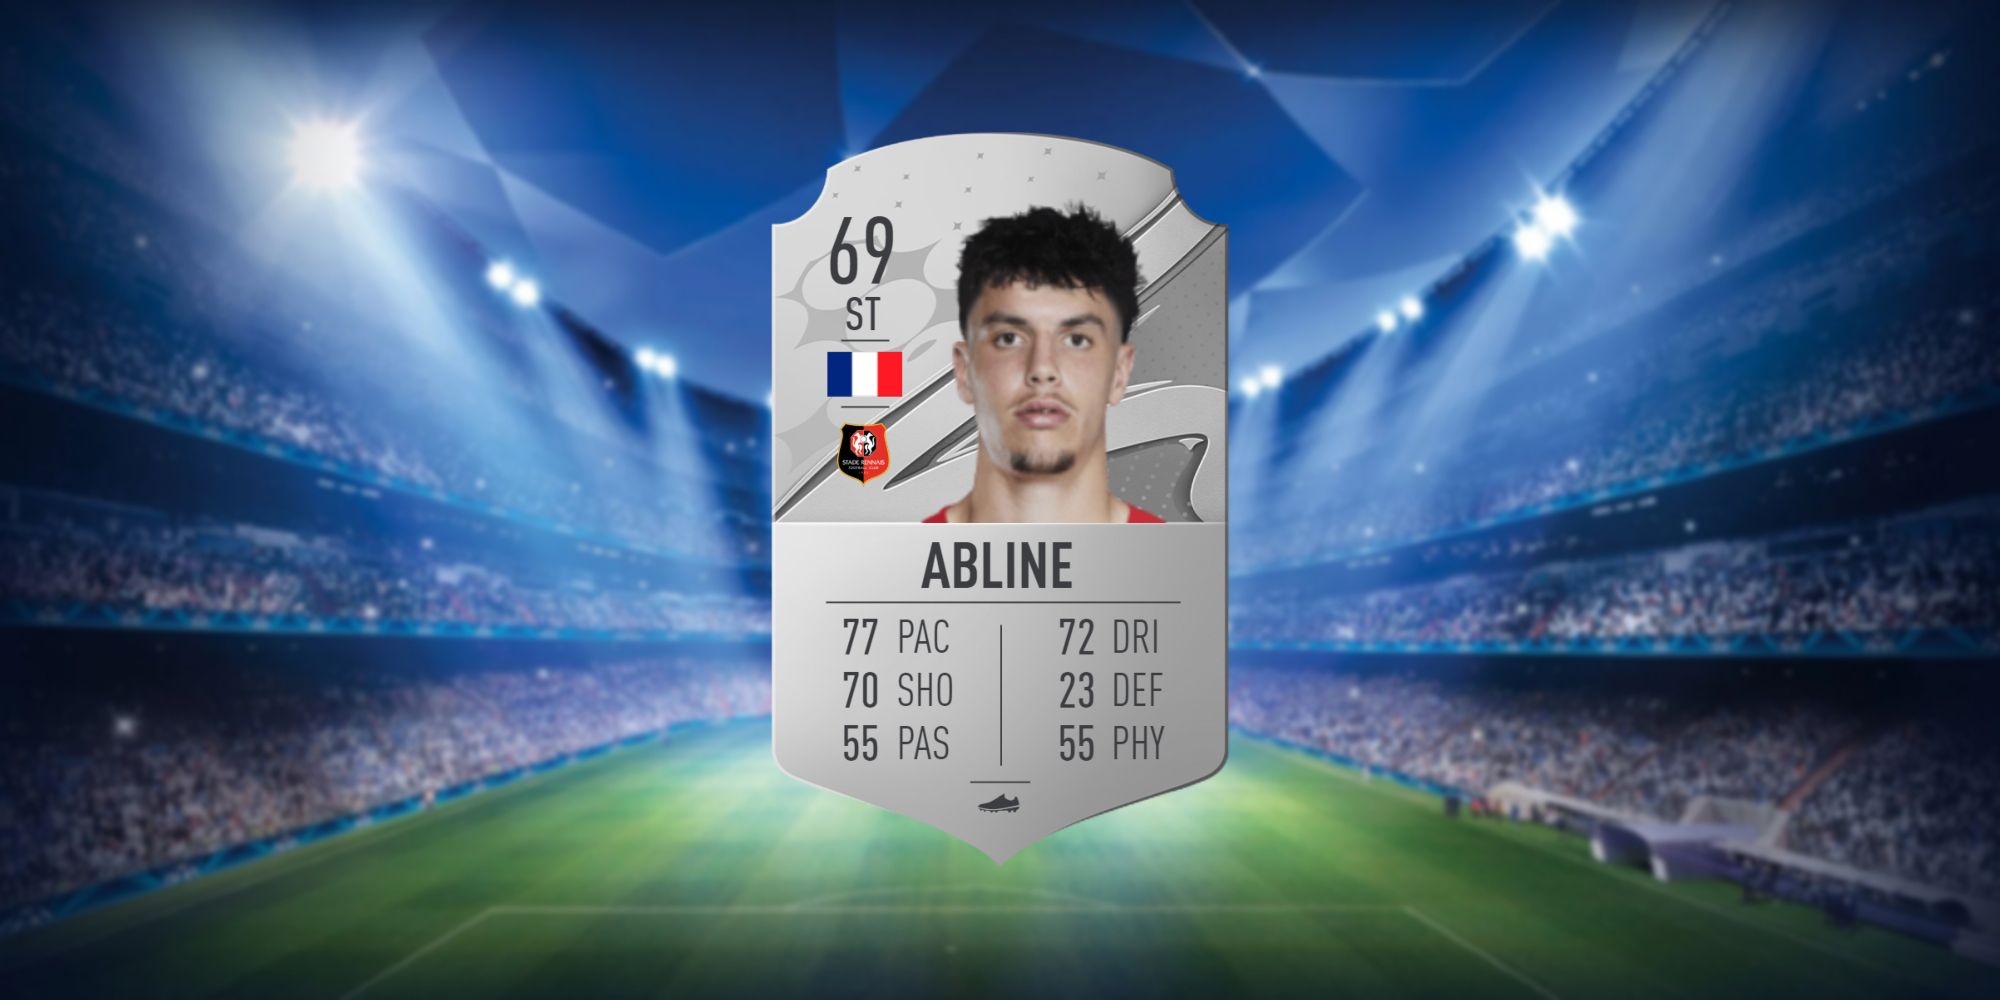 An image of Matthis Abline's FIFA 23 Card